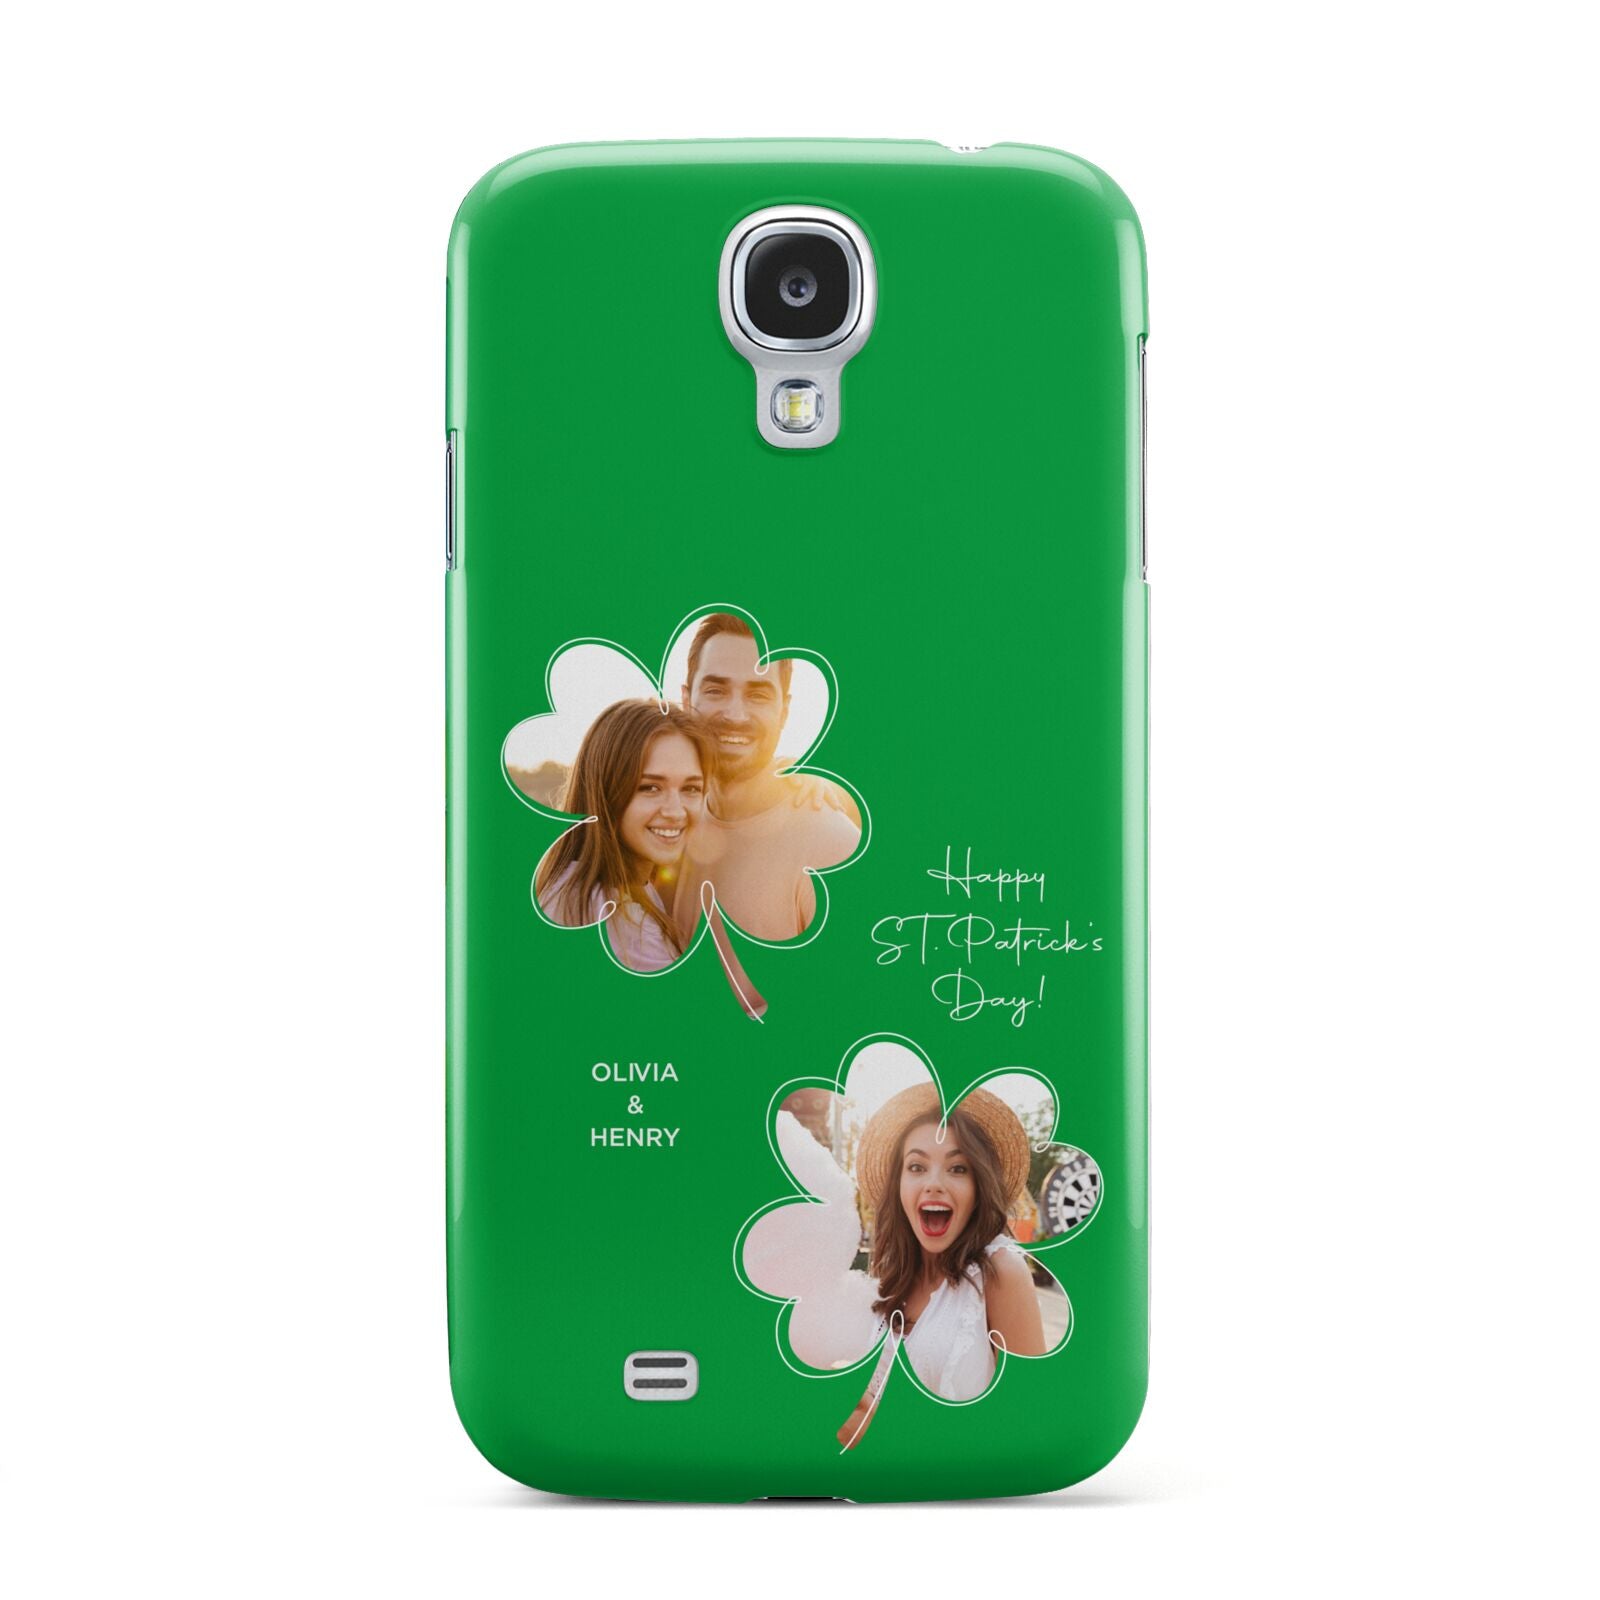 Personalised Photo St Patricks Day Samsung Galaxy S4 Case